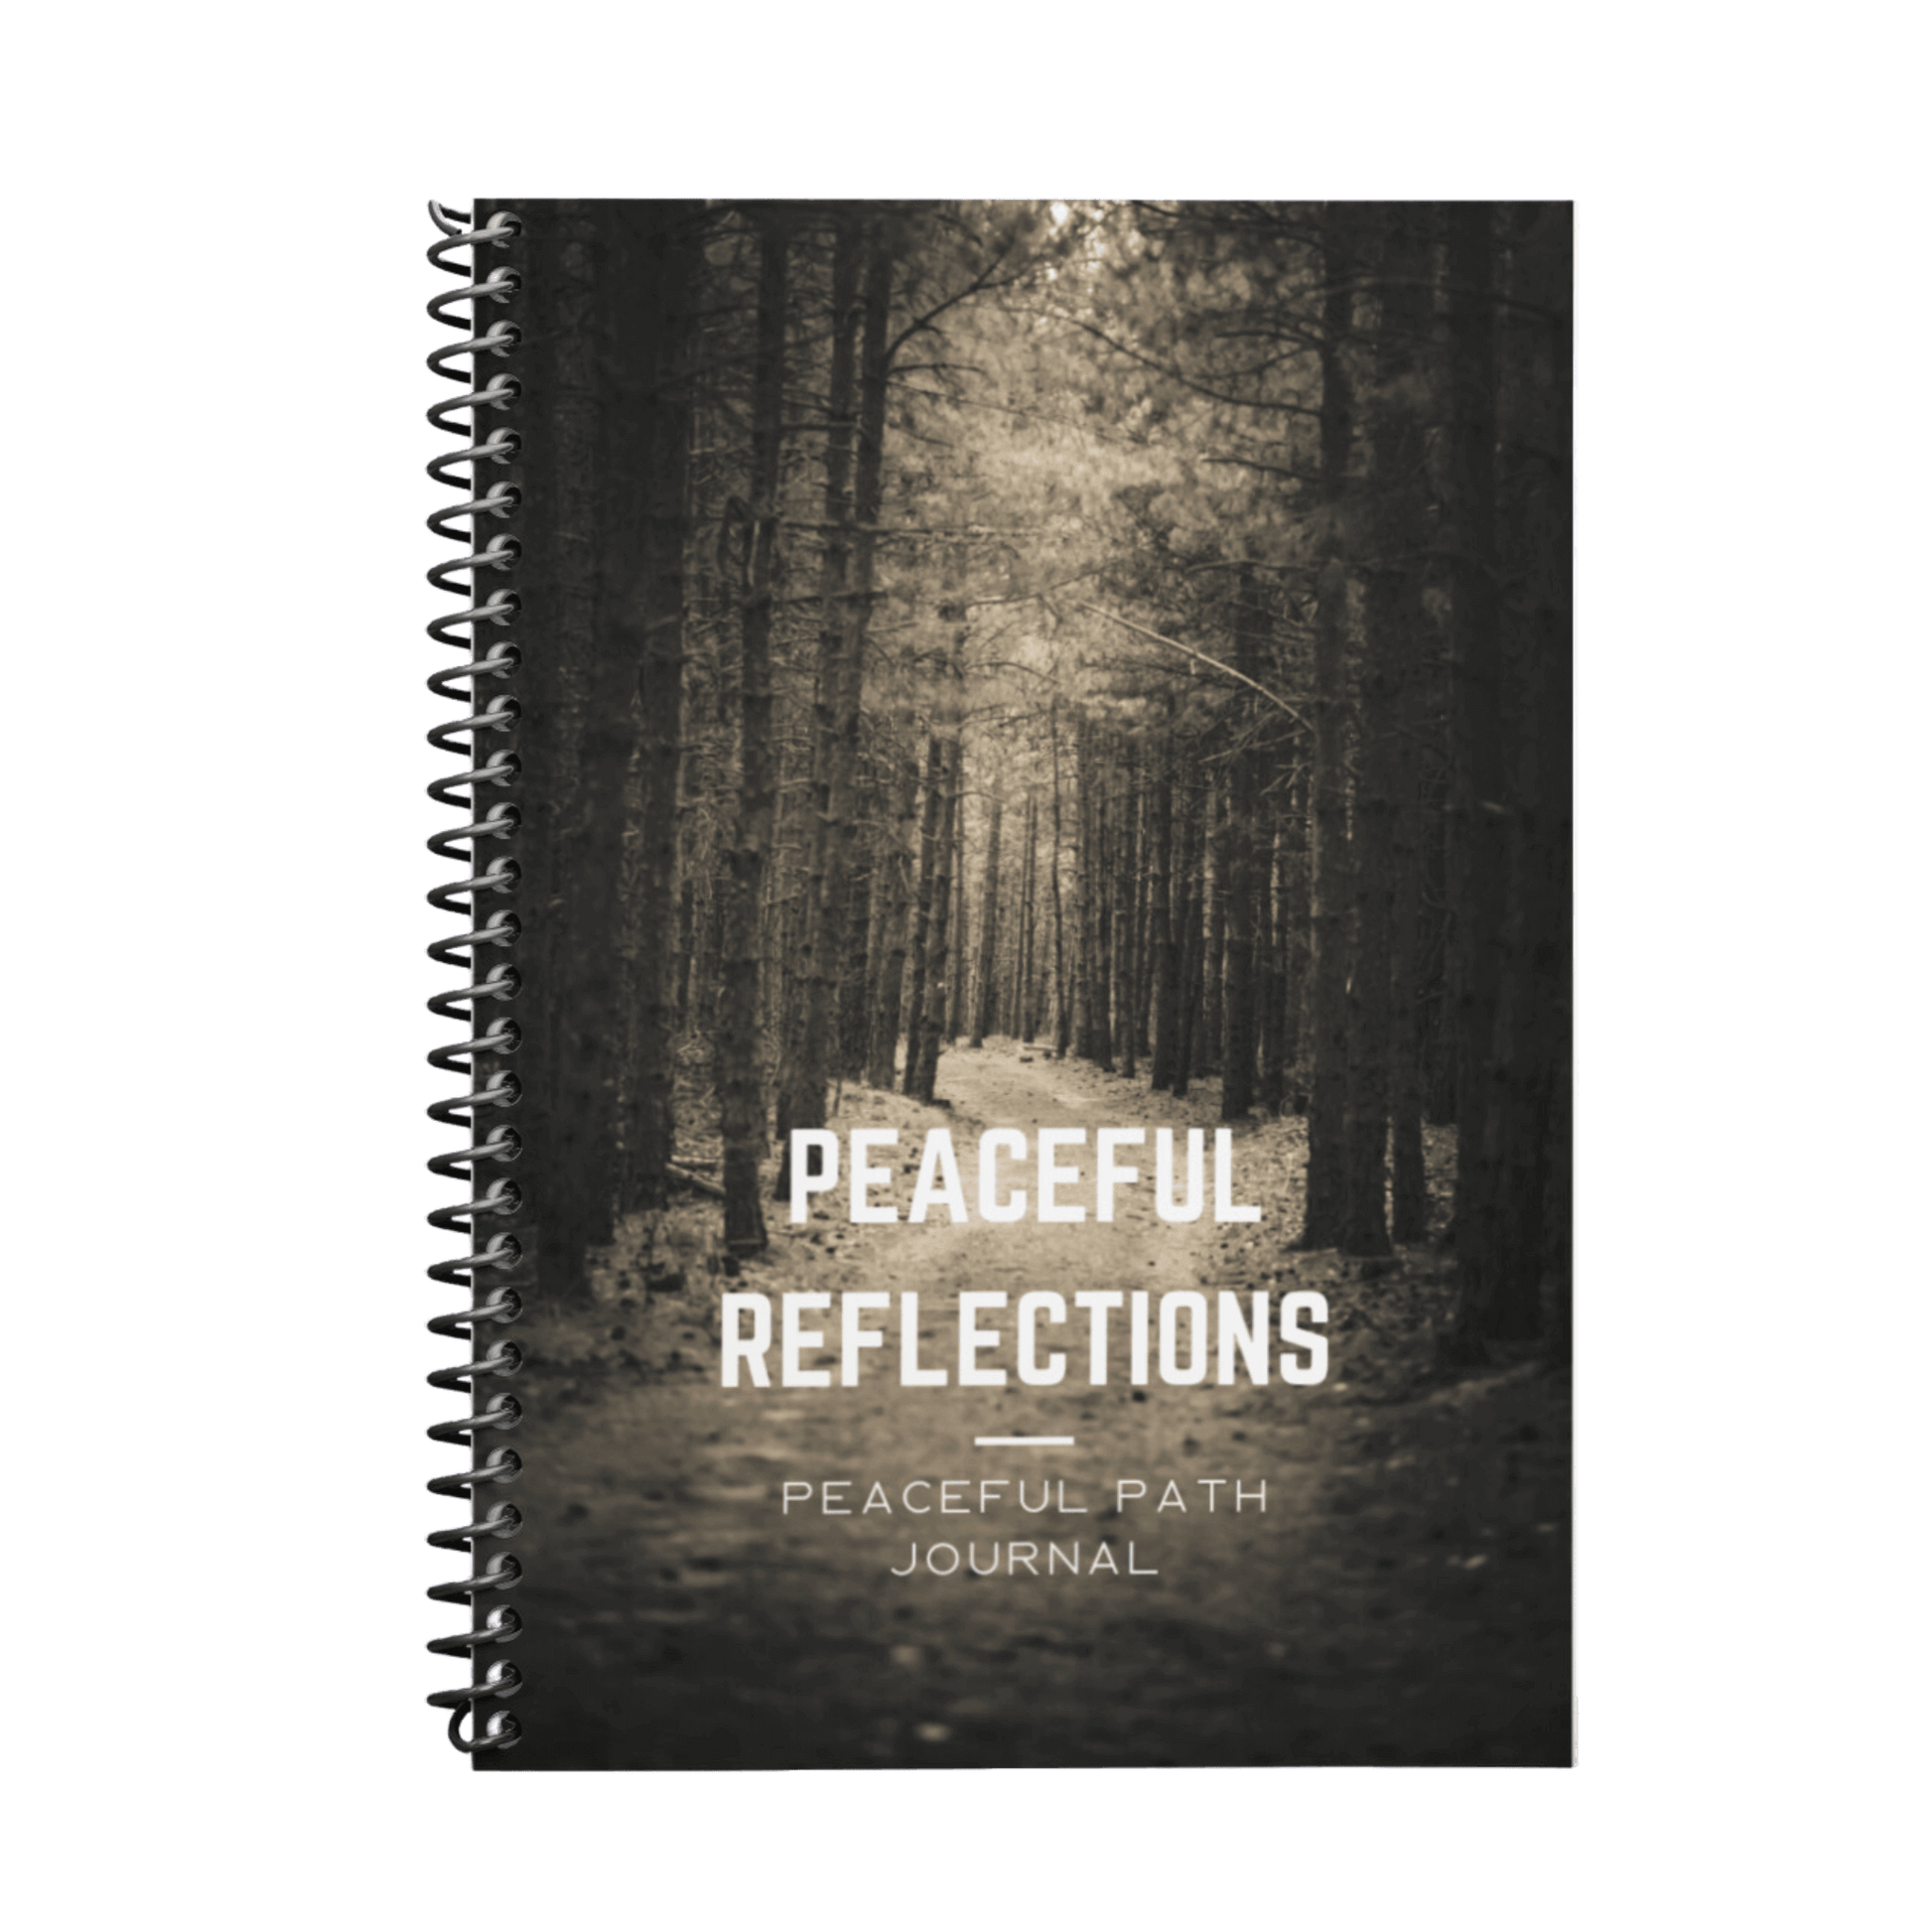 Image of Pathway to Peace Journal from Mindful Organizer selling for $24.00.